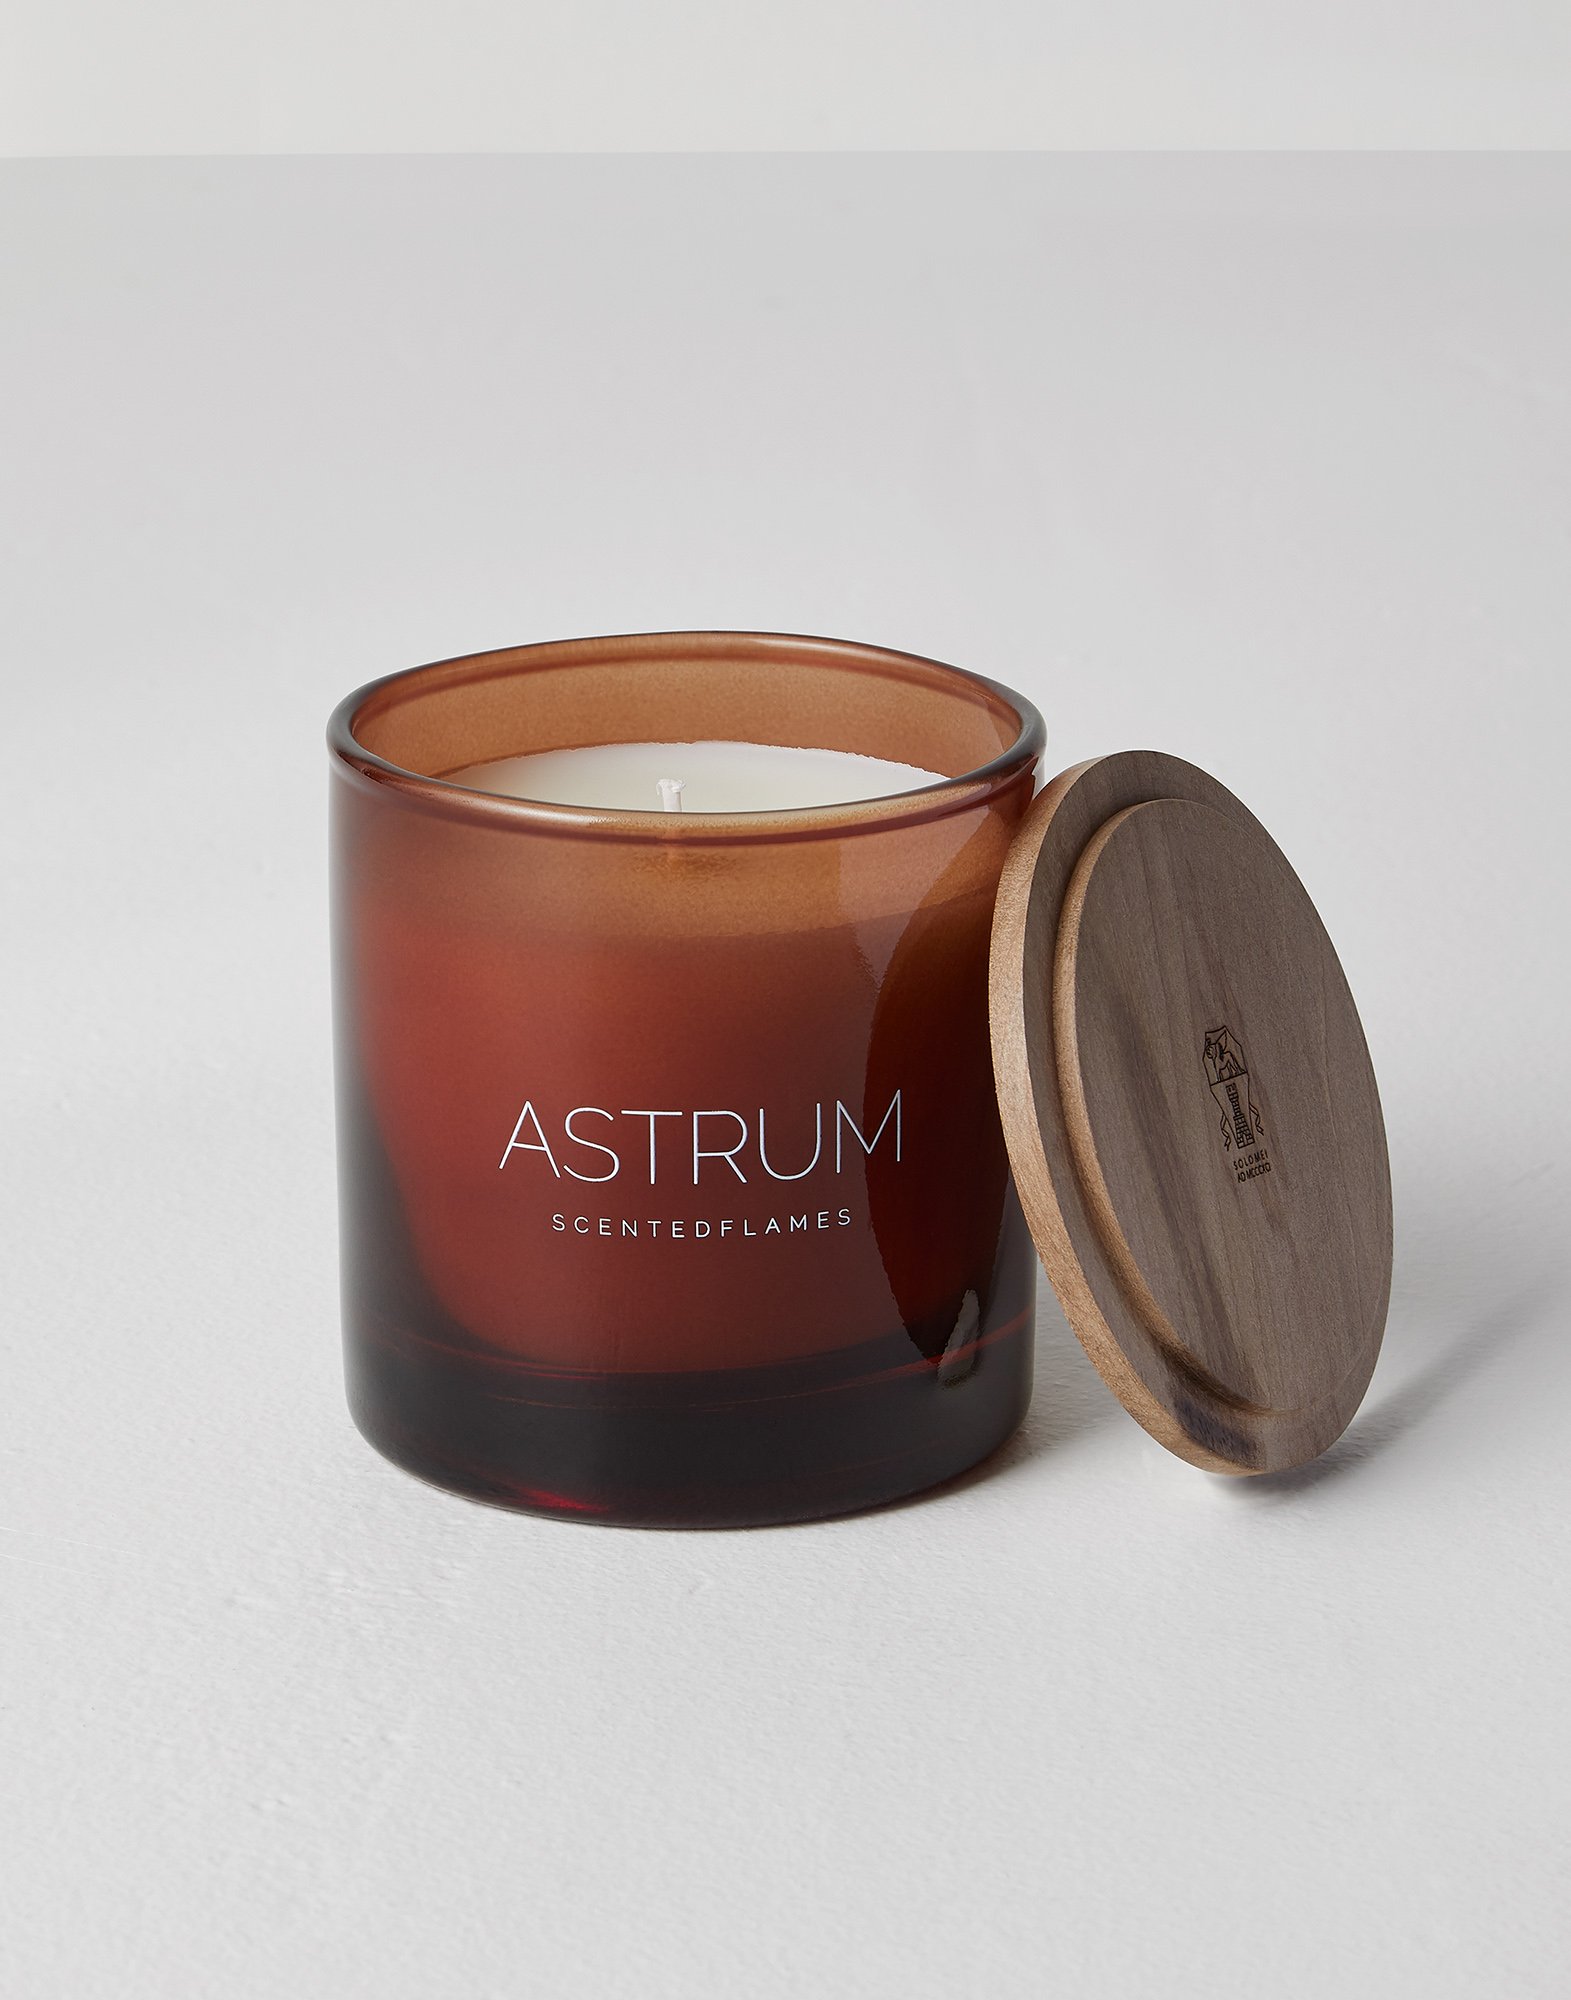 Scented candle with Astrum fragrance